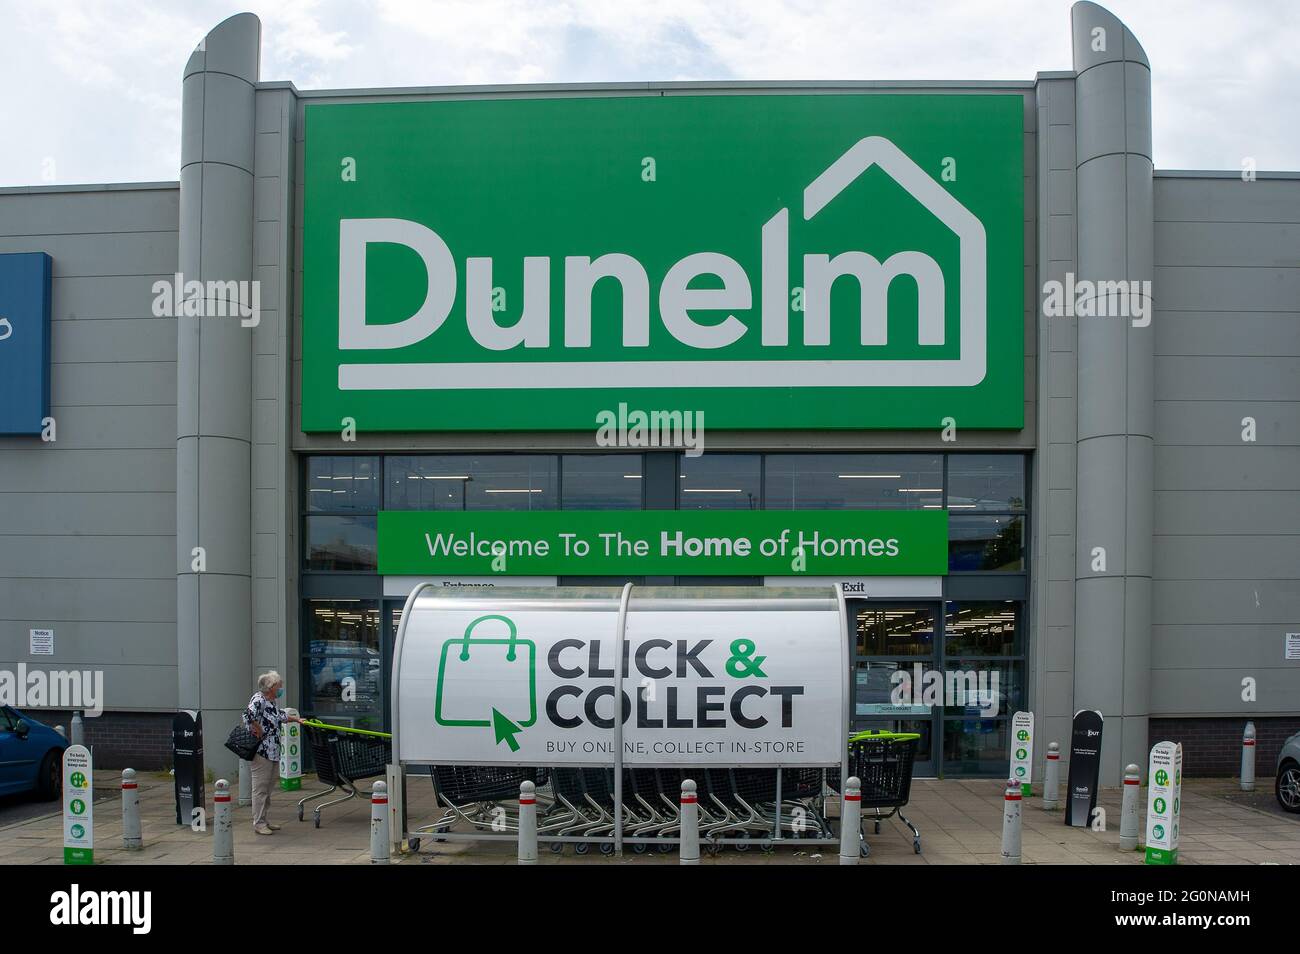 Slough, Berkshire, UK. 2nd June, 2021. Homeware company Dunelm have seen sales growth at a  “very strong” level since it's stores reopened from 12 April 2021. Credit: Maureen McLean/Alamy Stock Photo